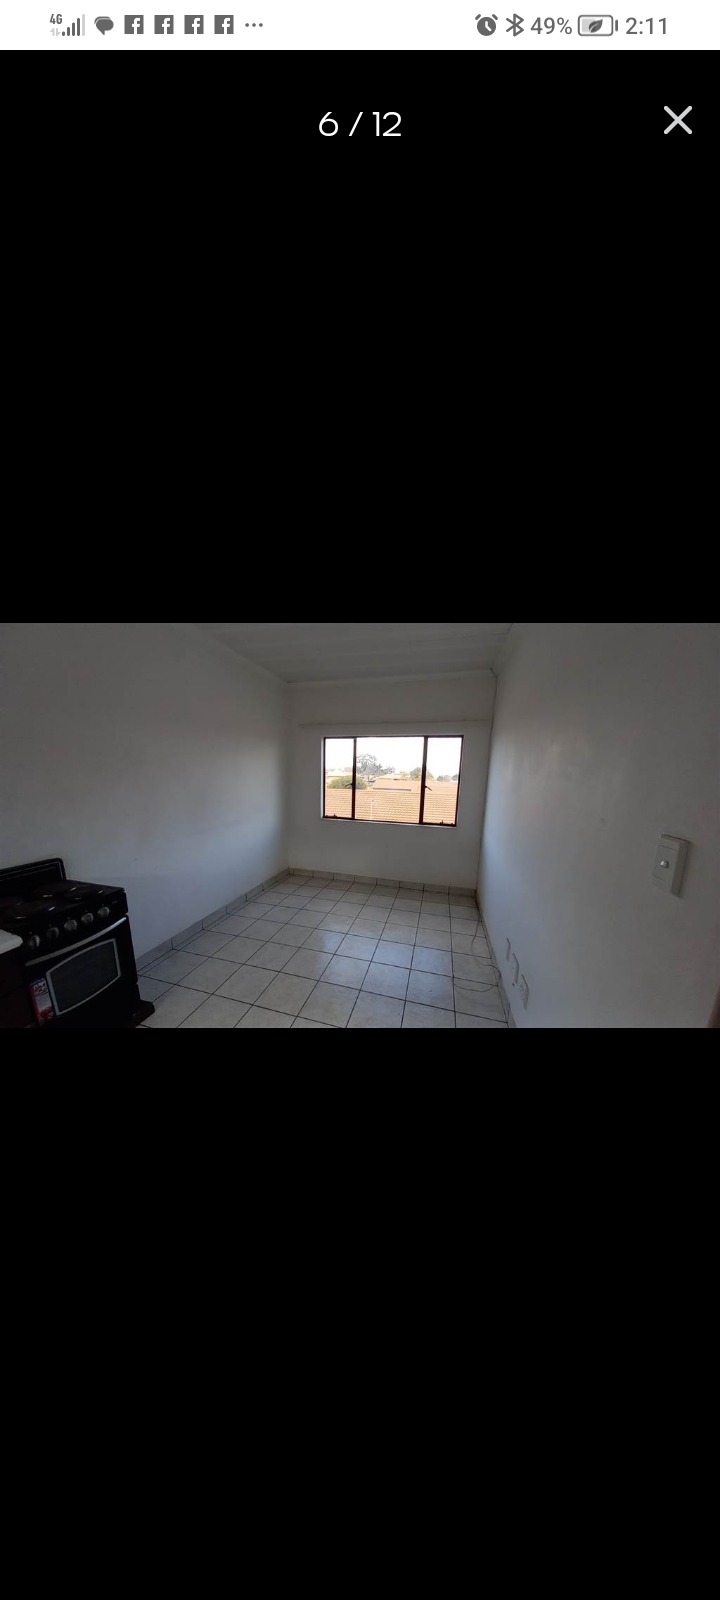 Room for rent in Nimrodpark Gauteng. Listed by PropertyCentral